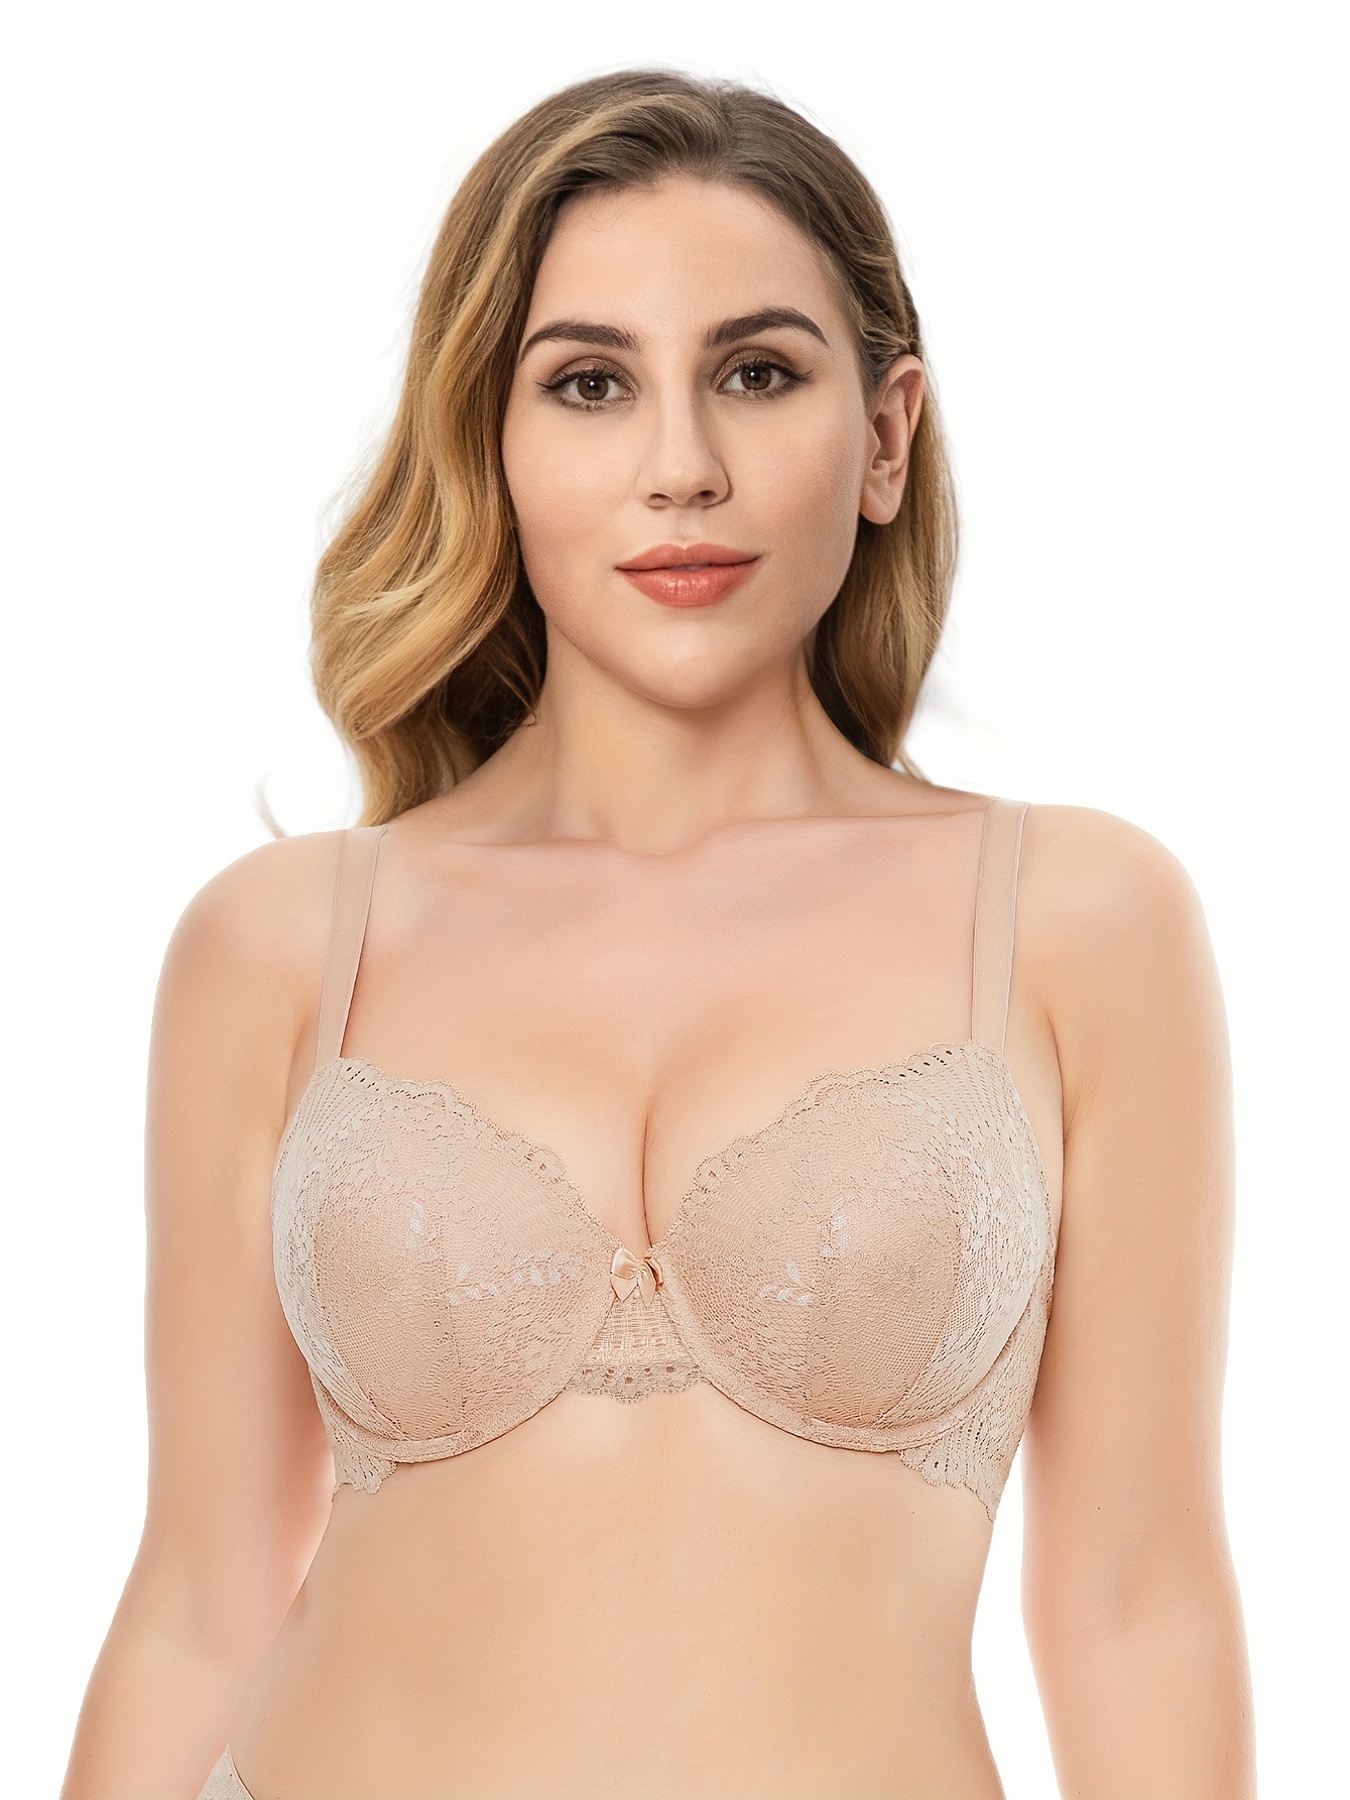 Women's Underwire Padded Bra Letter Printed Push-Up Bra Comfortable  Everyday Bra with Convertible Straps 